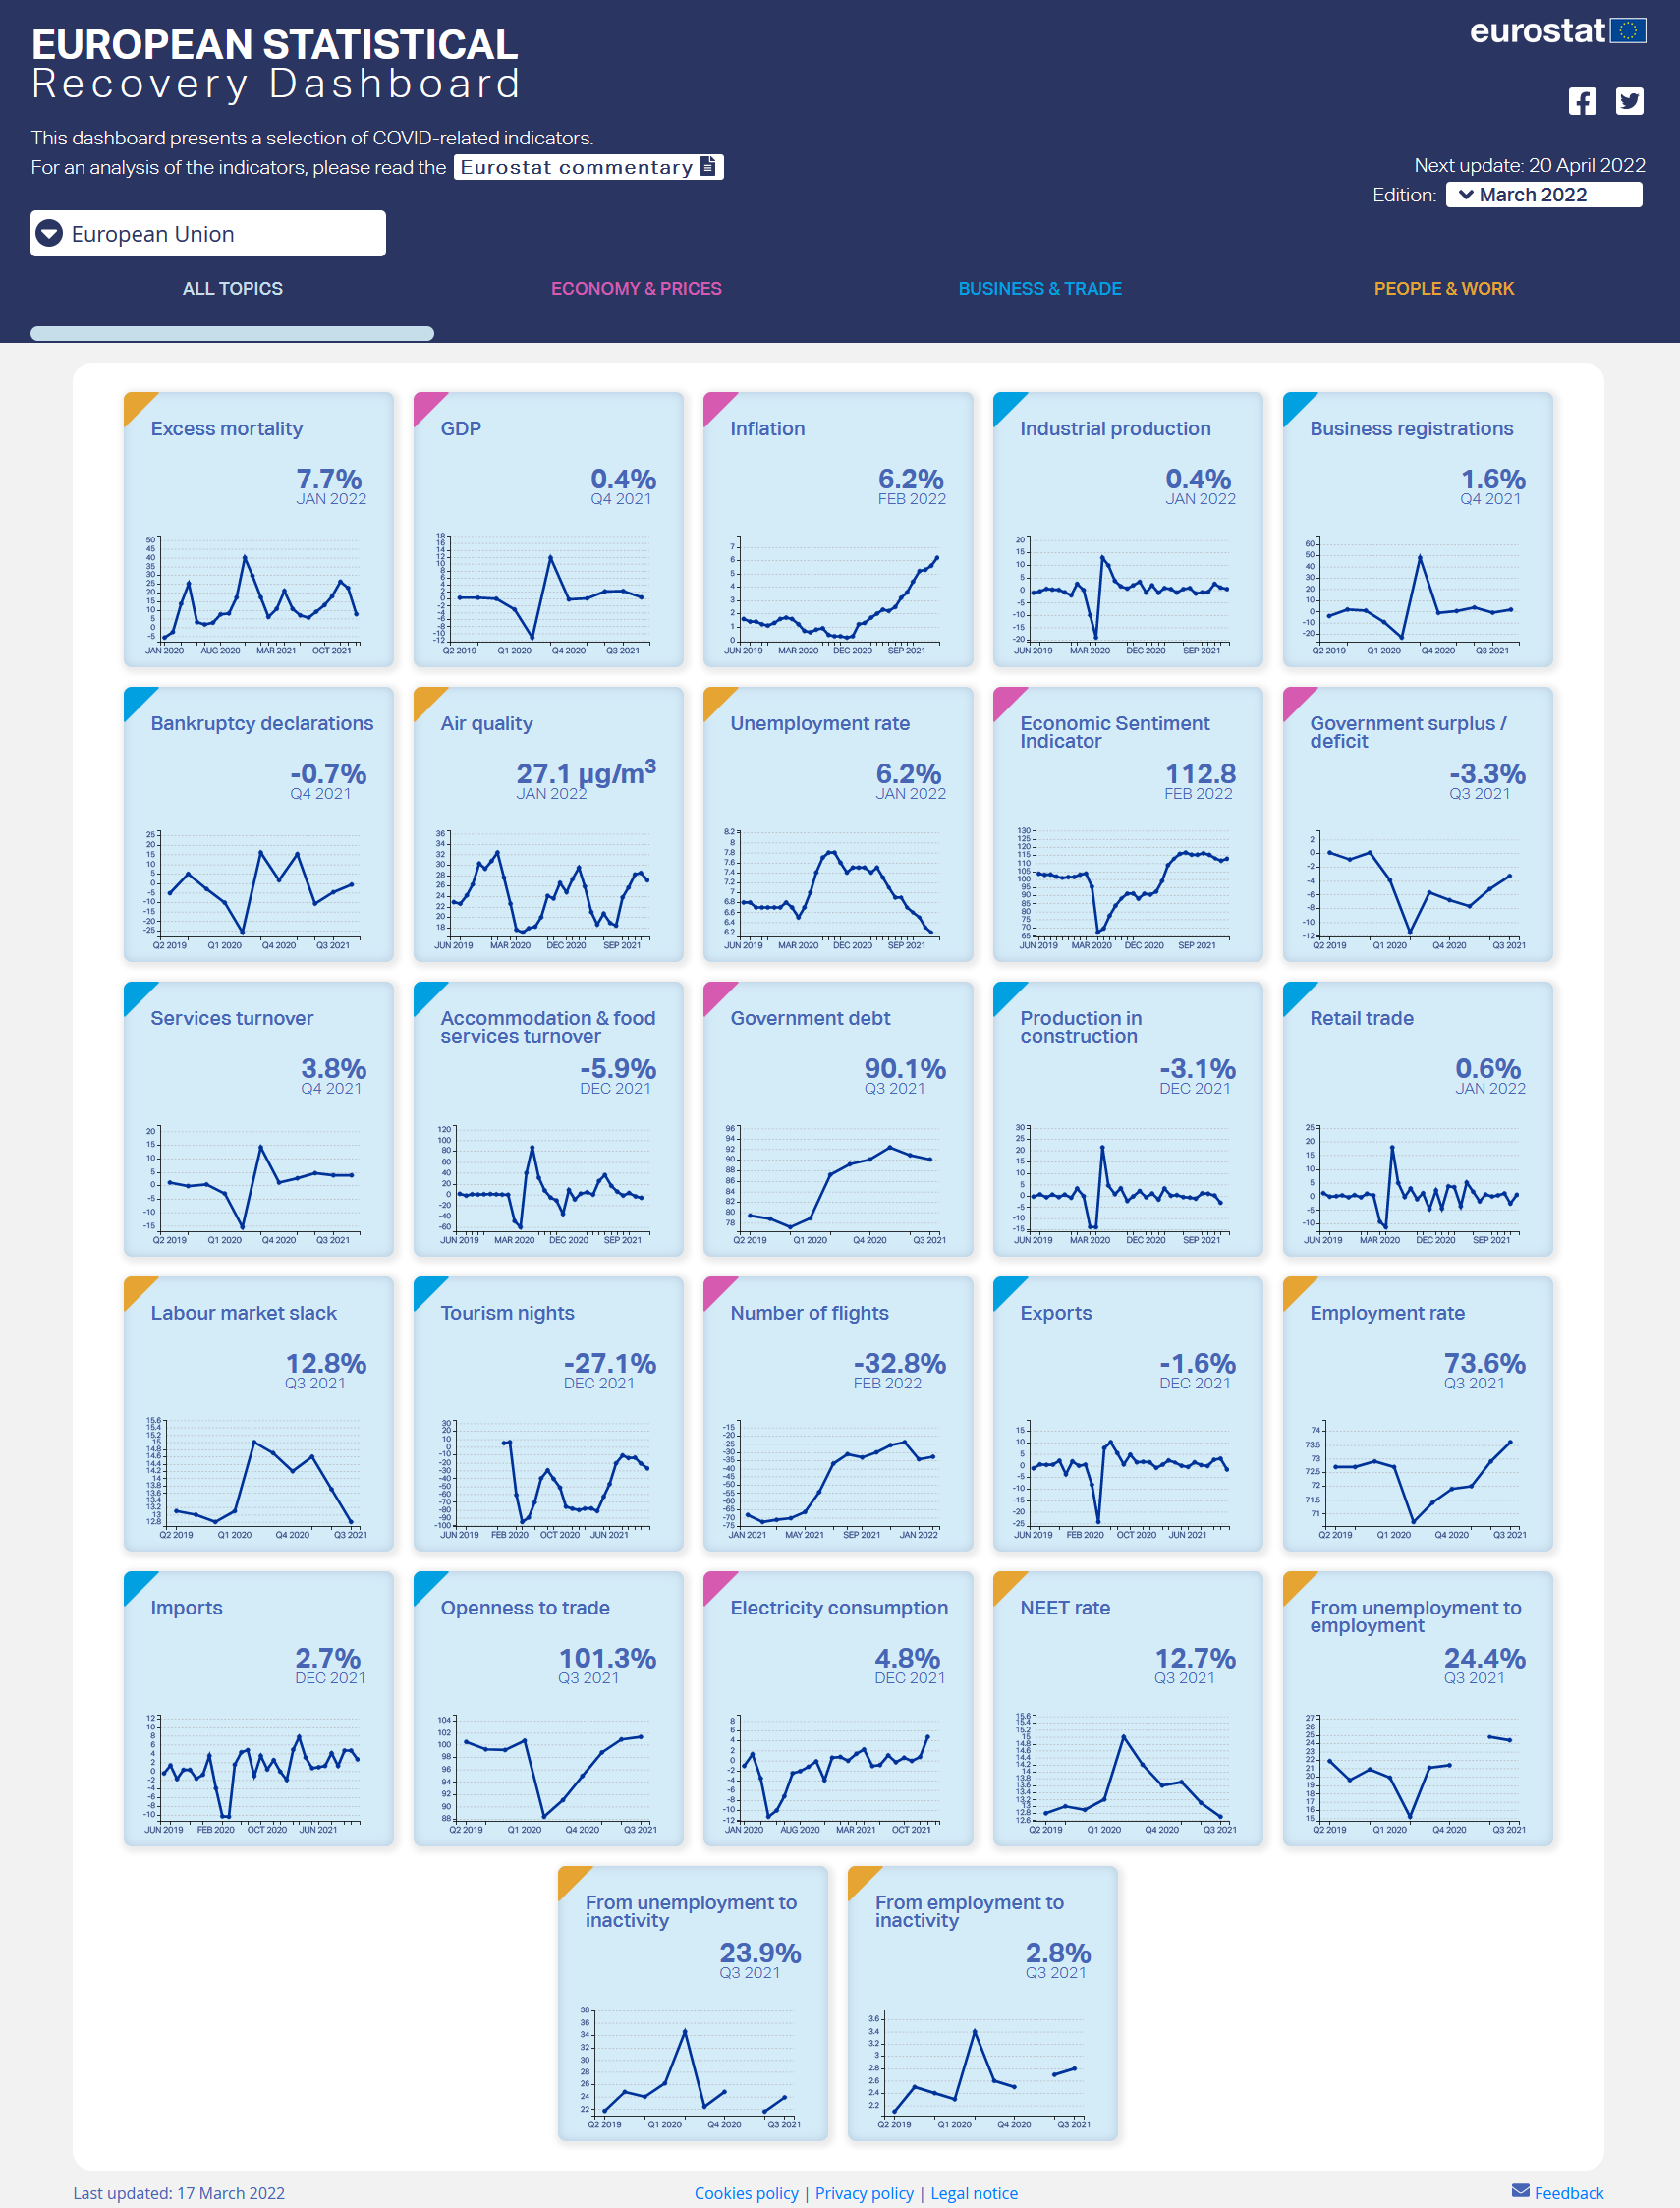 Screenshot: March edition of the European Statistical Recovery Dashboard